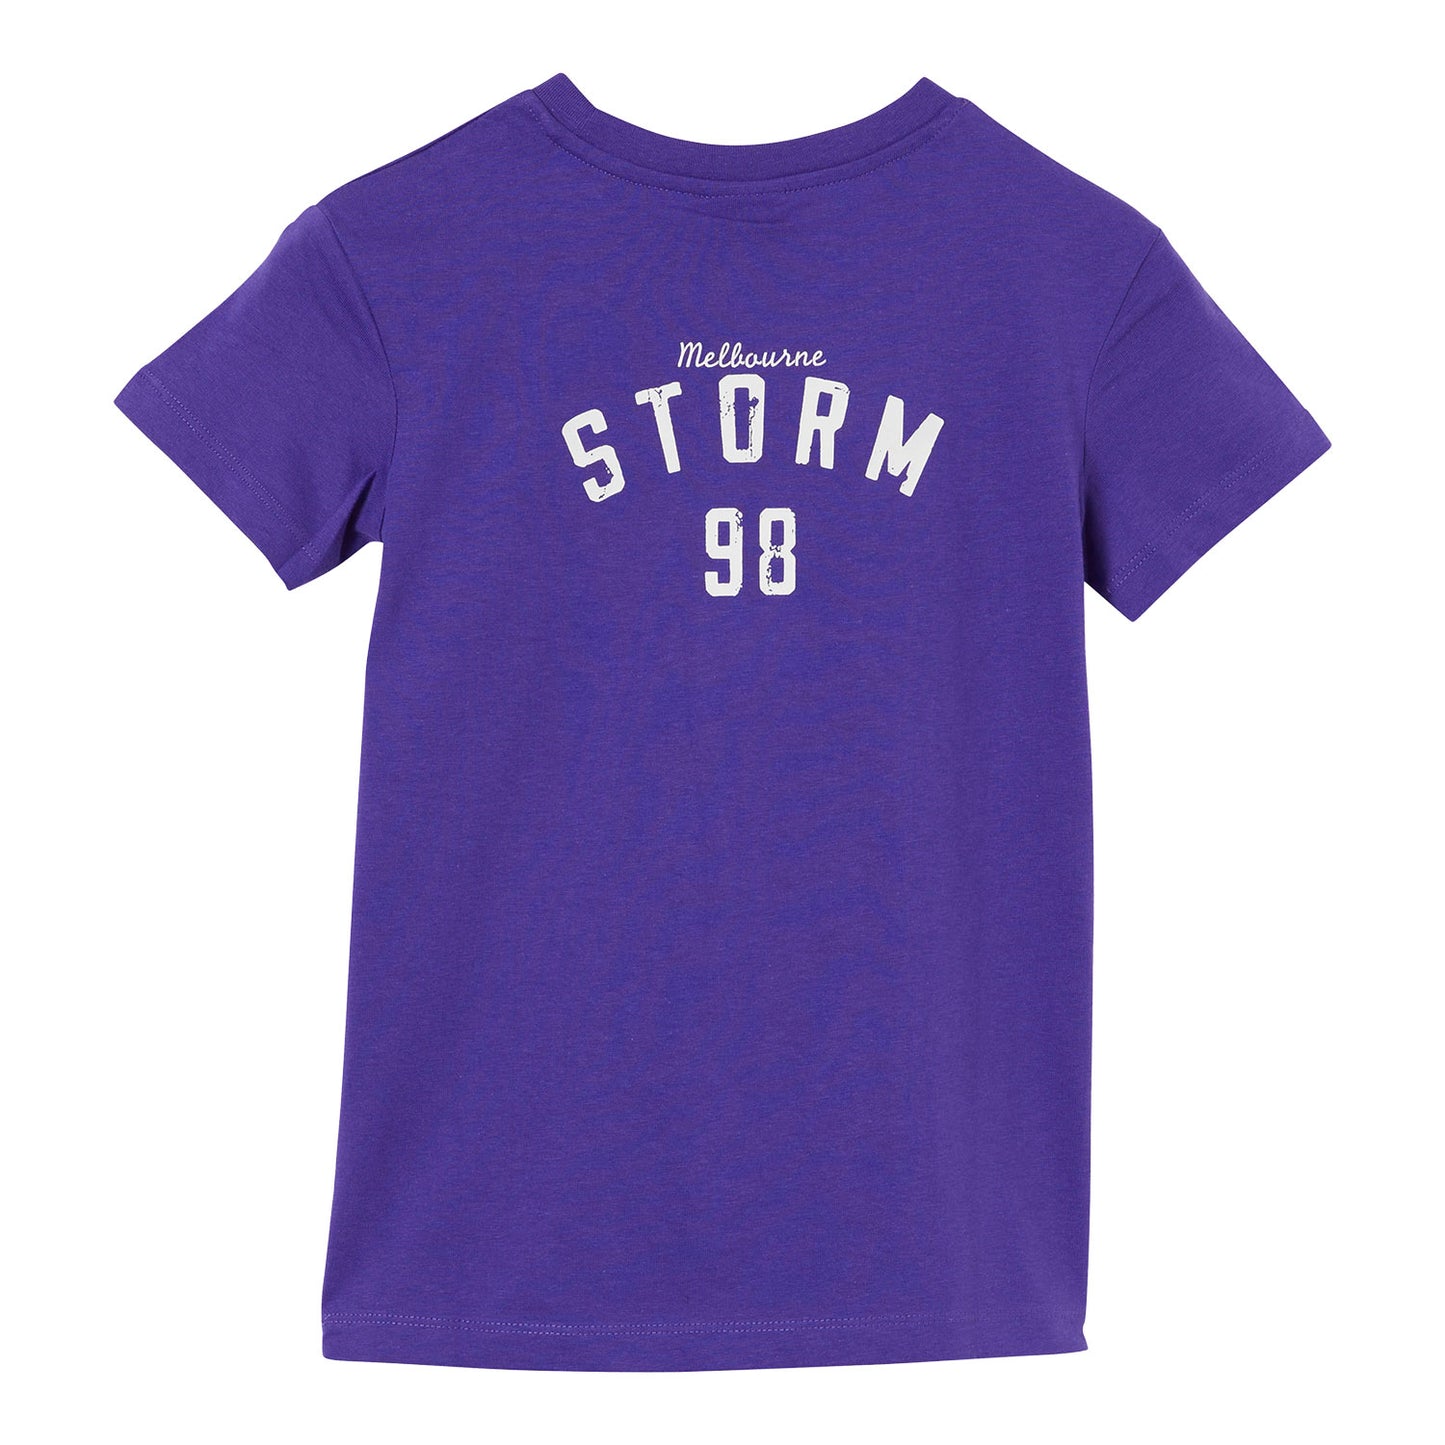 Melbourne Storm Youth Mono Tee